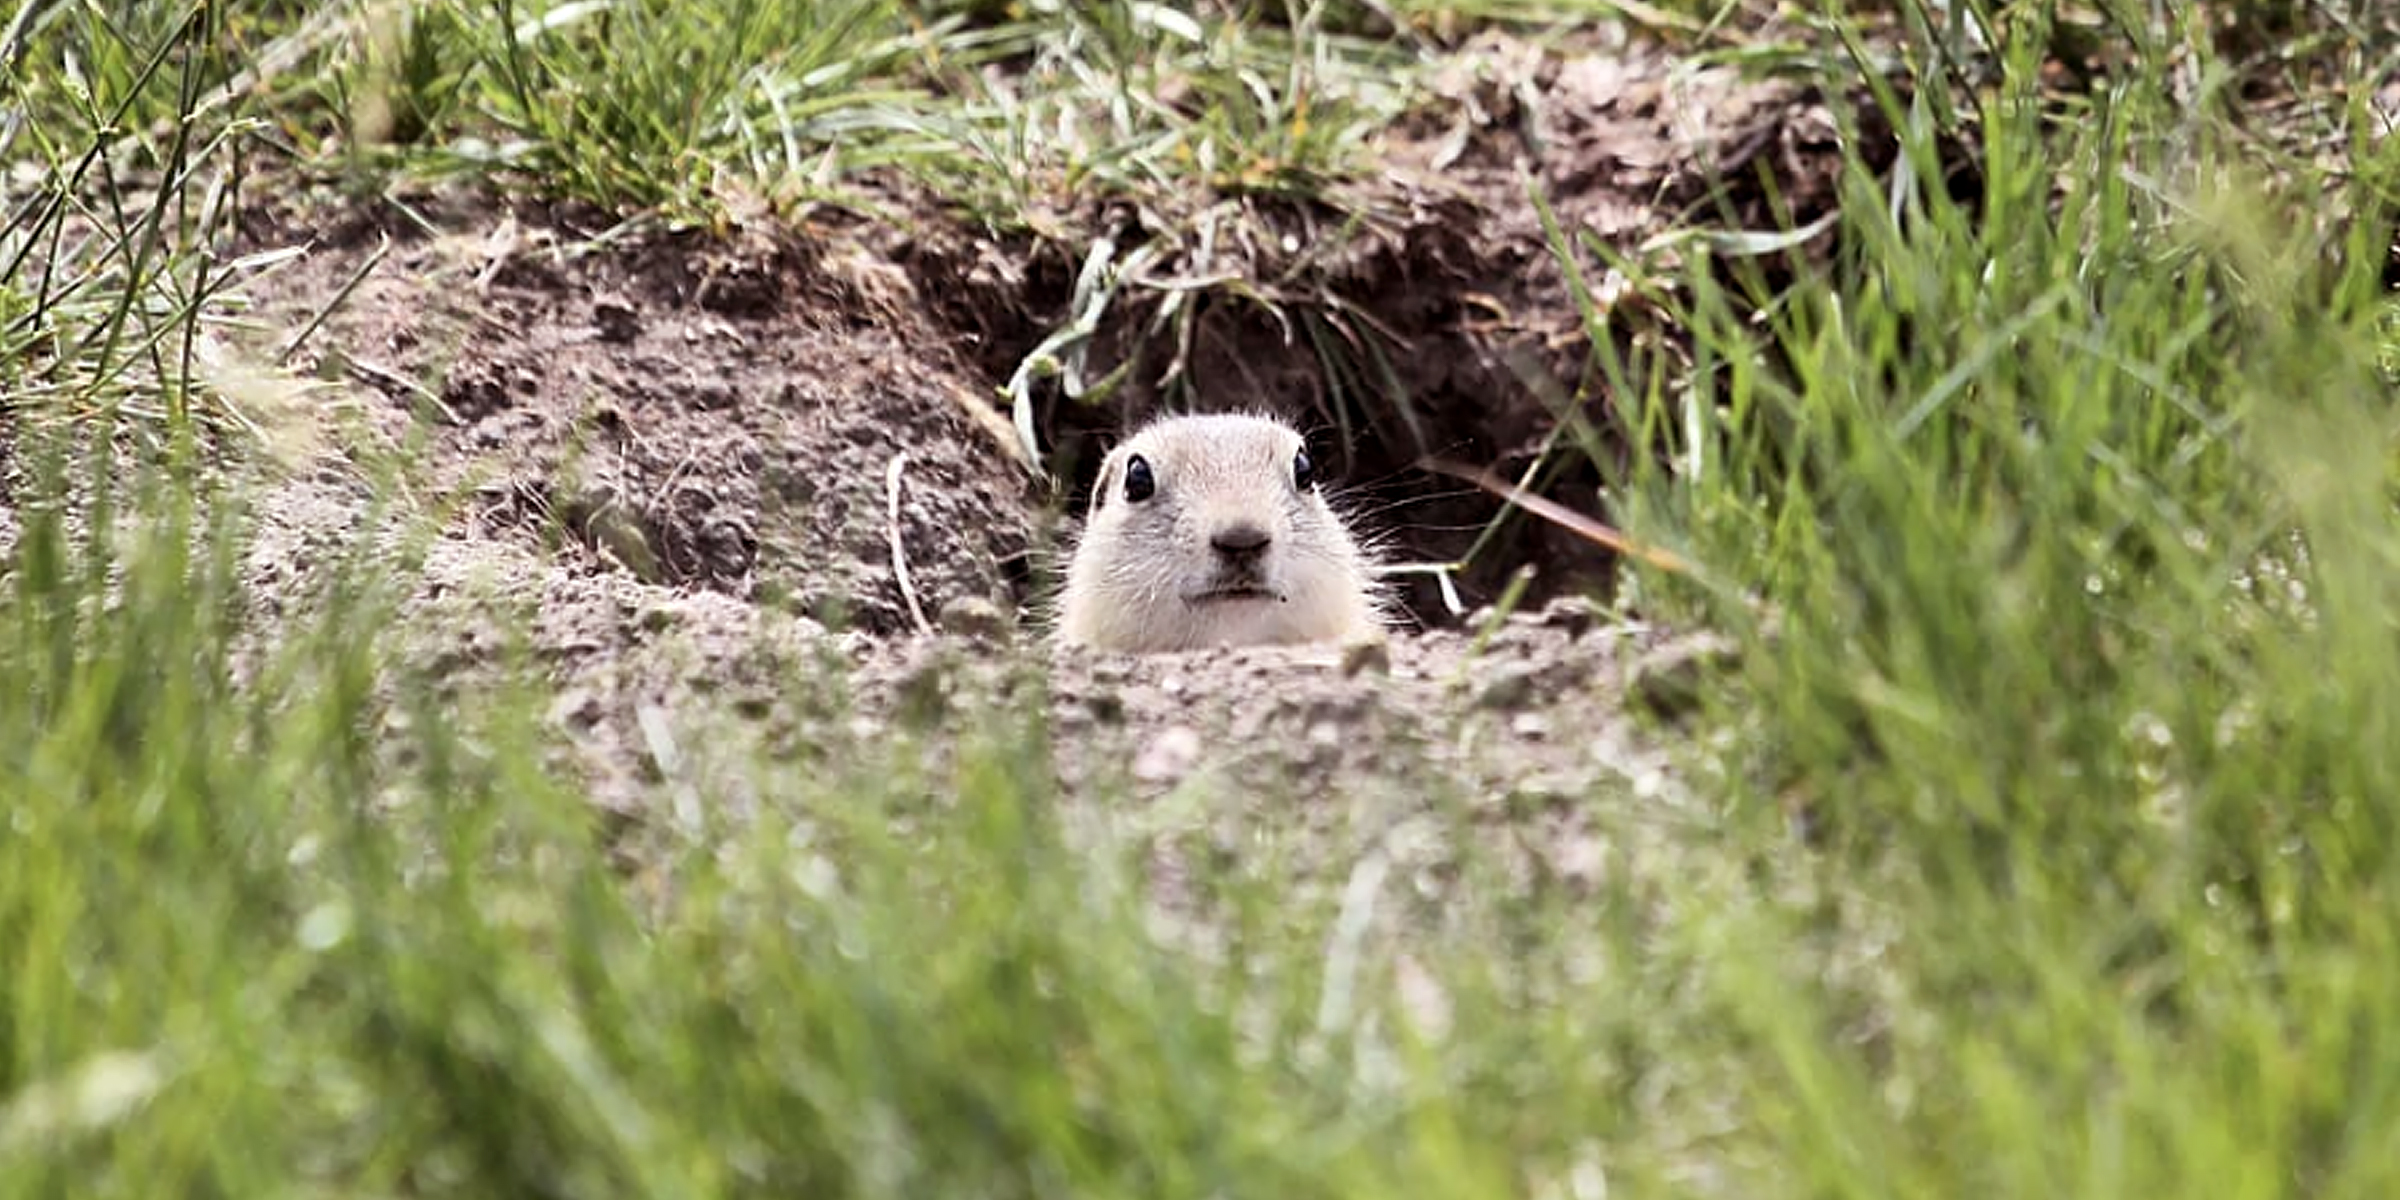 A ground squirrel peaking out from a hole | Source: Instagram/frog_guy2112